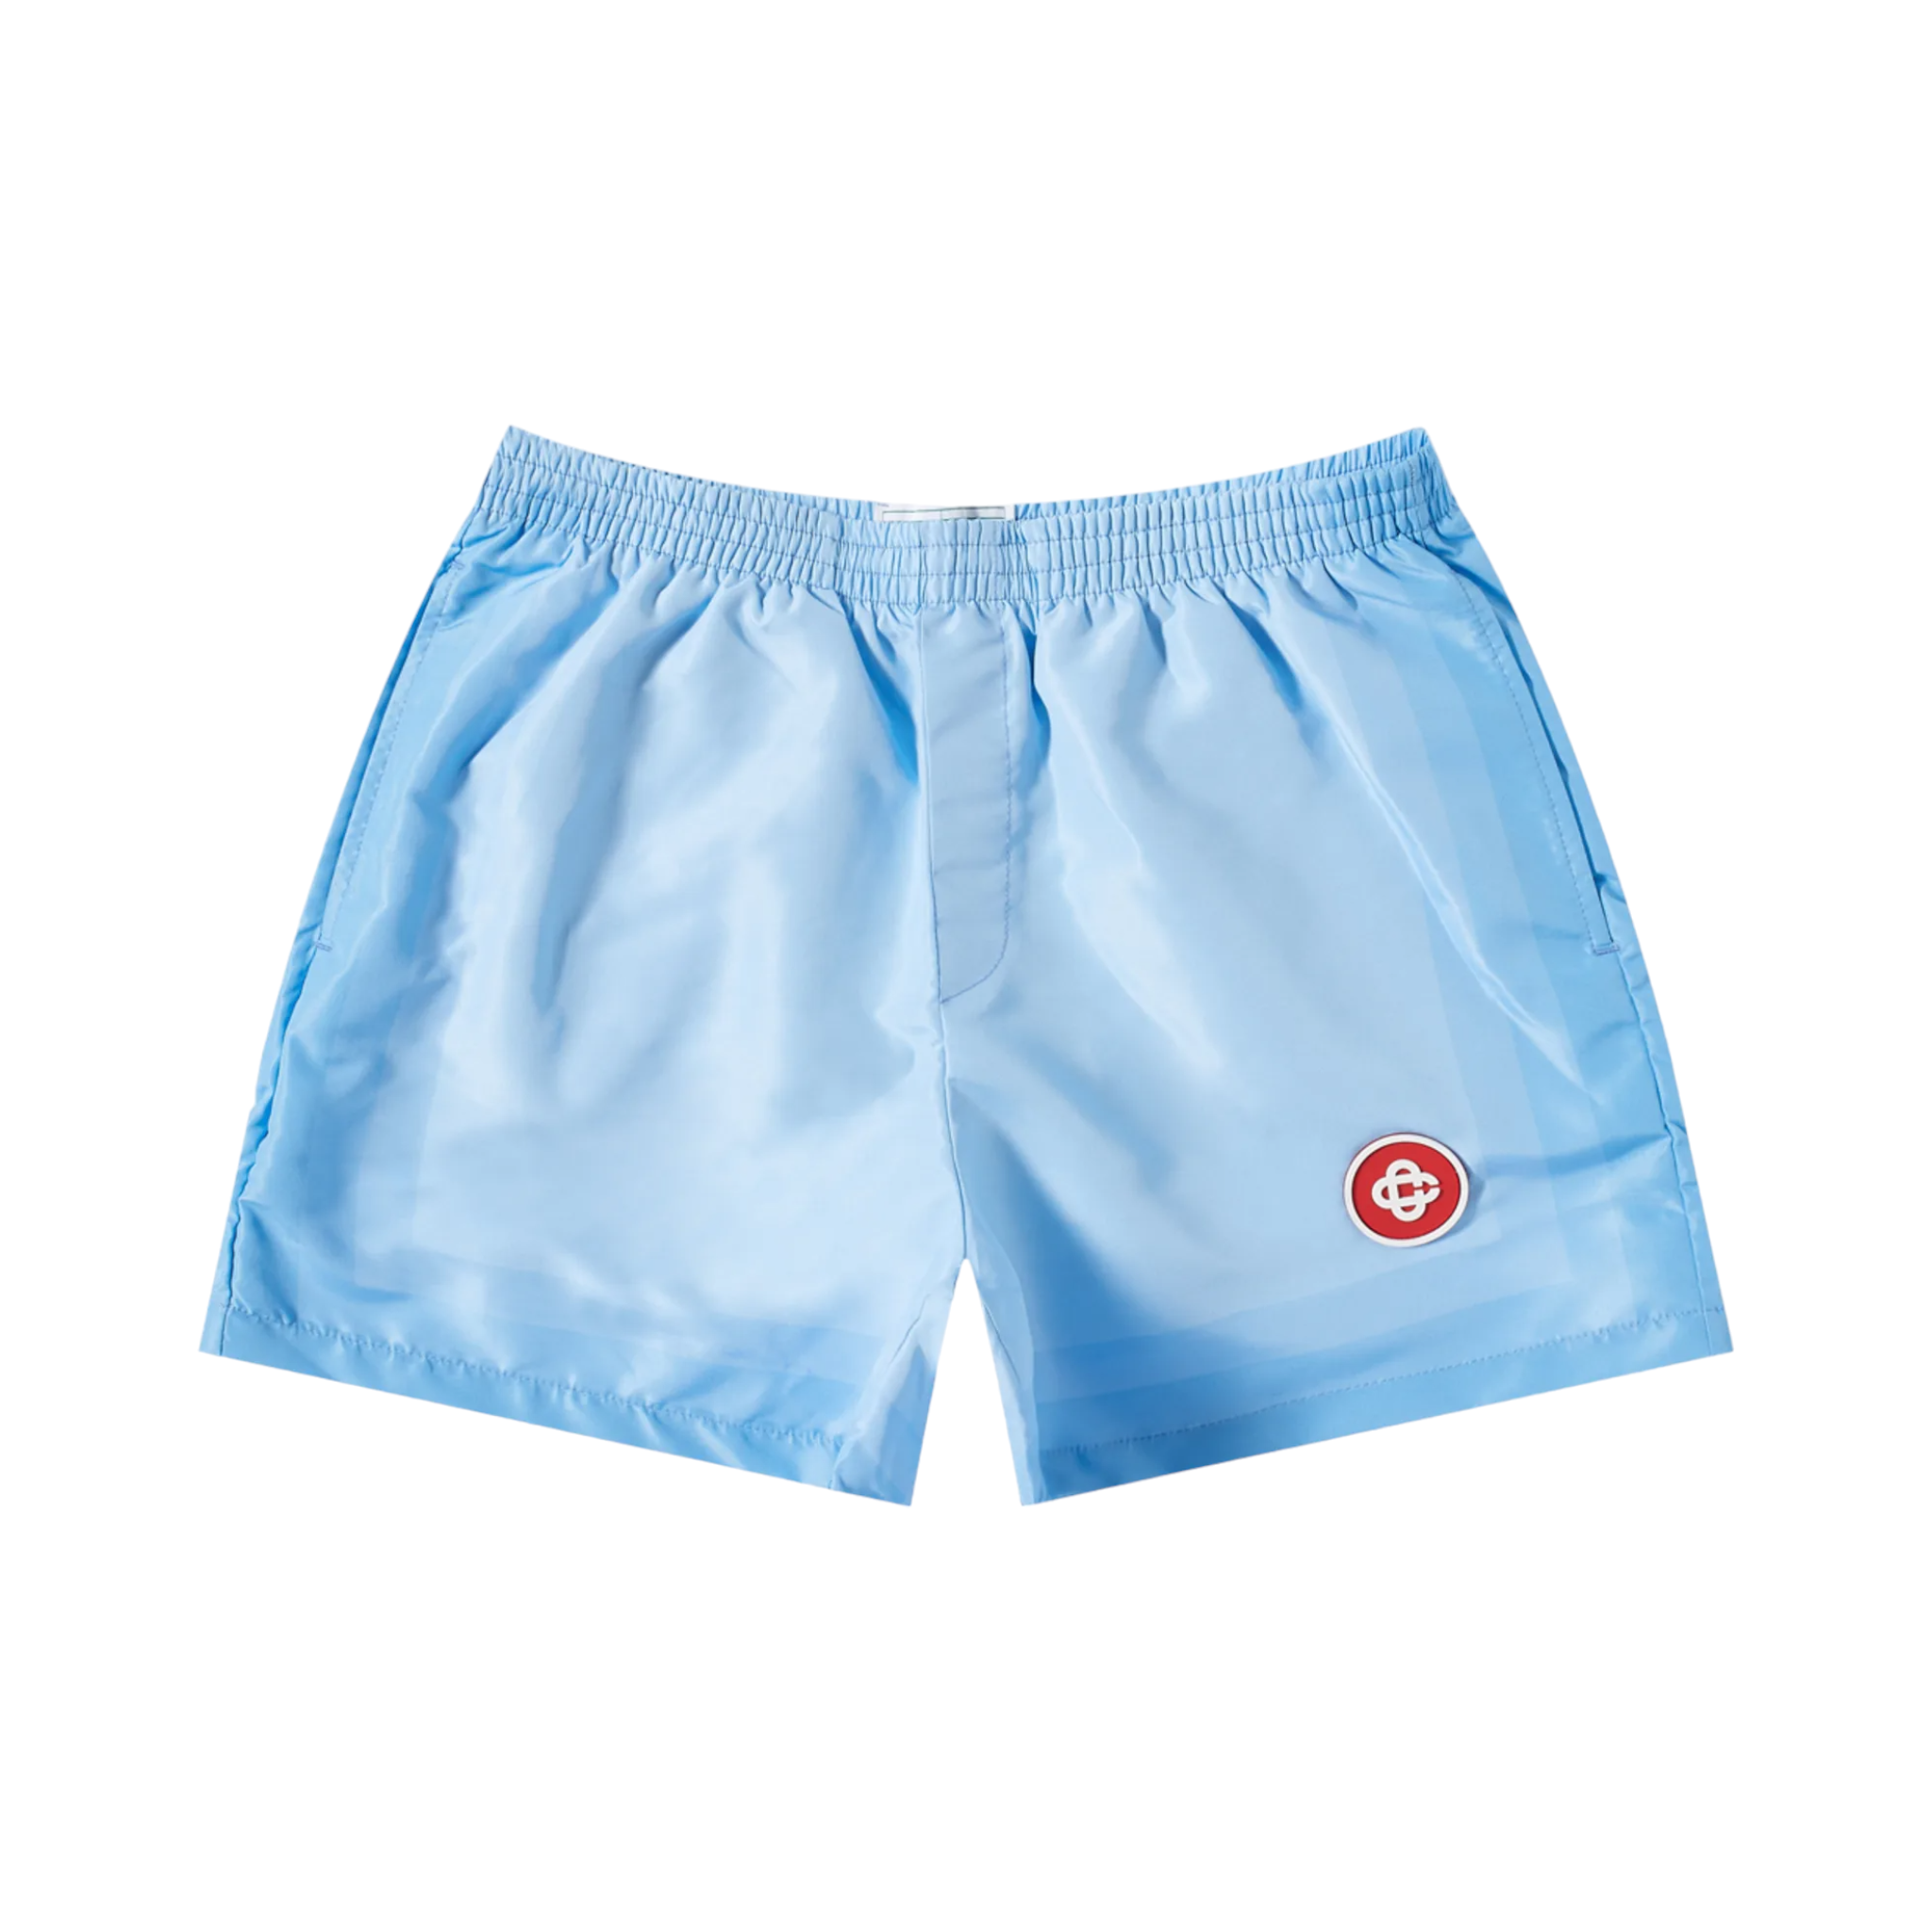 Casablanca Day of Victory linen shorts - Blue